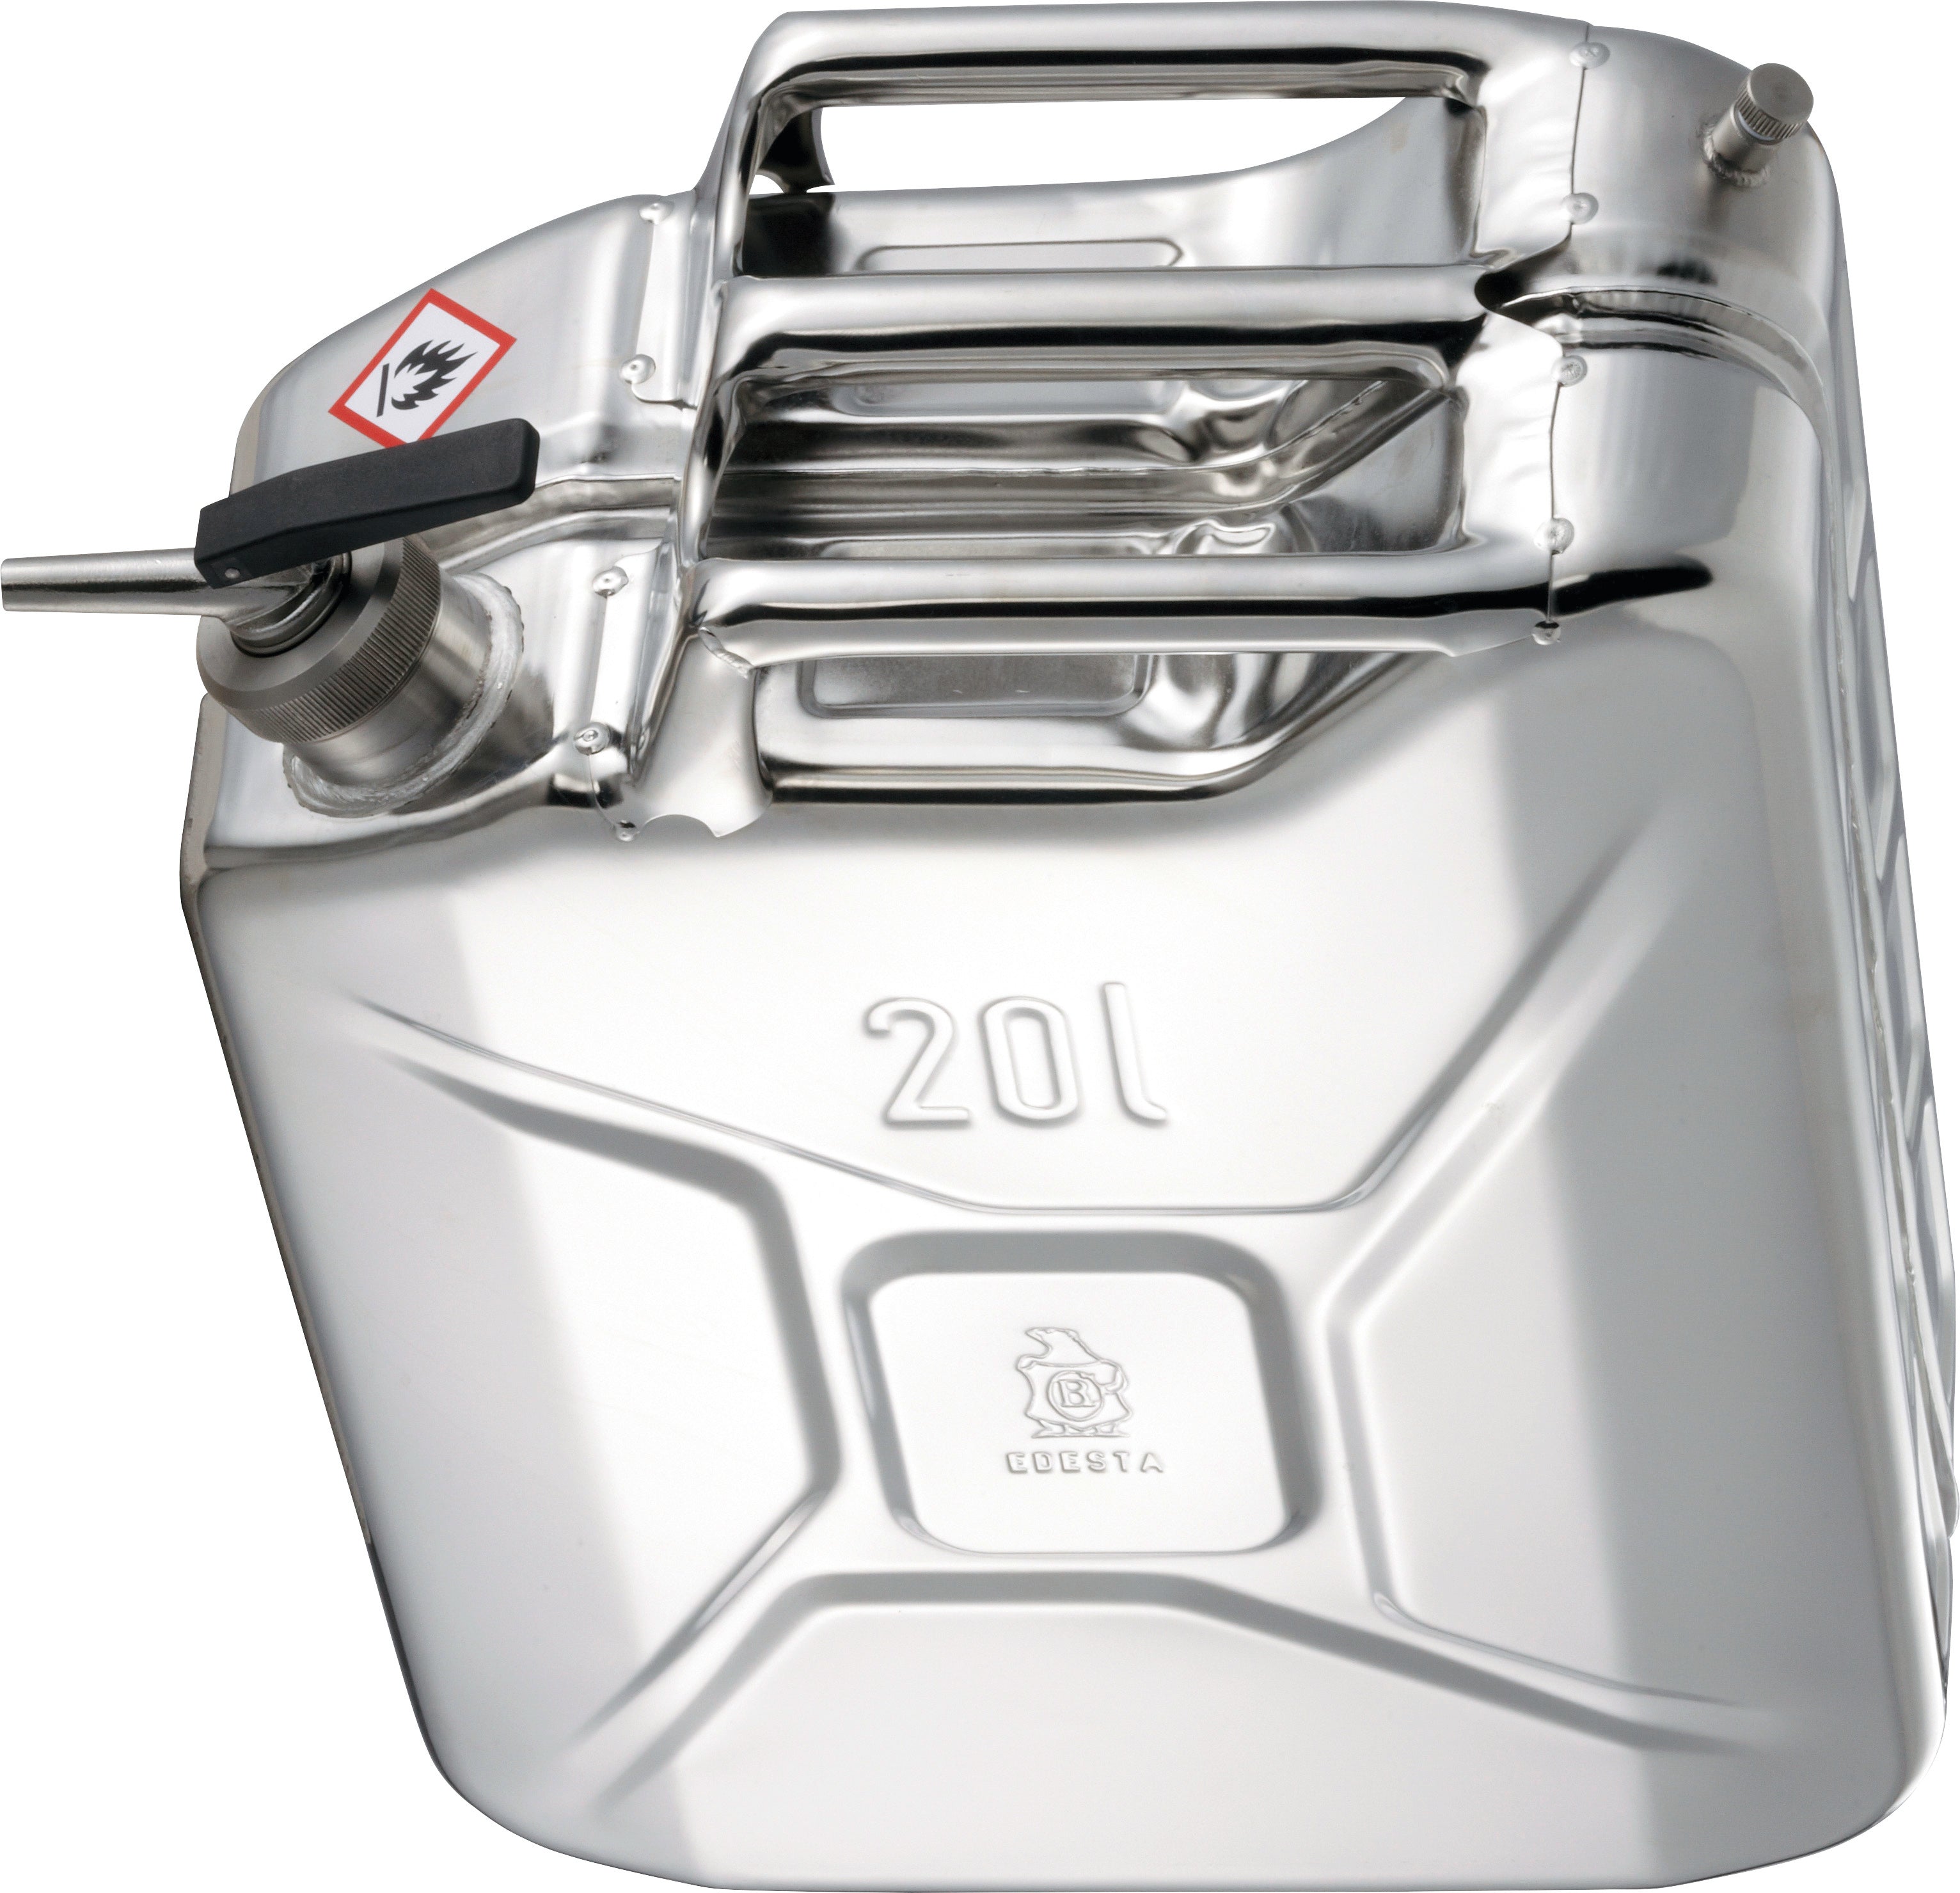 Safety canister st.steel 1.4571, 20 L, stainless steel 1.4571 polished